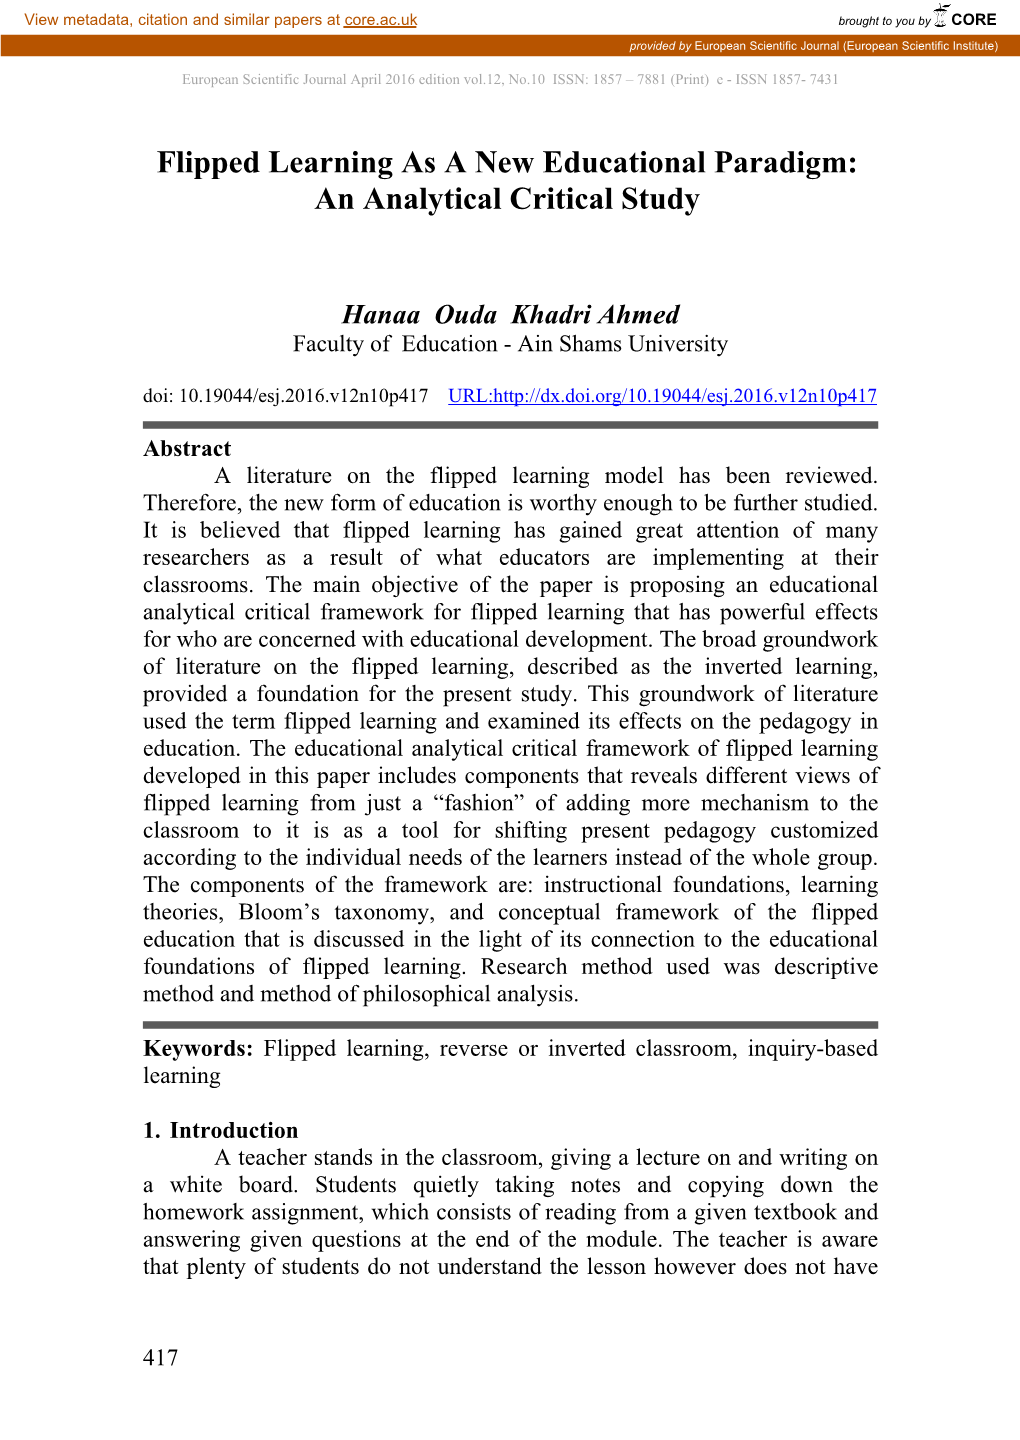 Flipped Learning As a New Educational Paradigm: an Analytical Critical Study